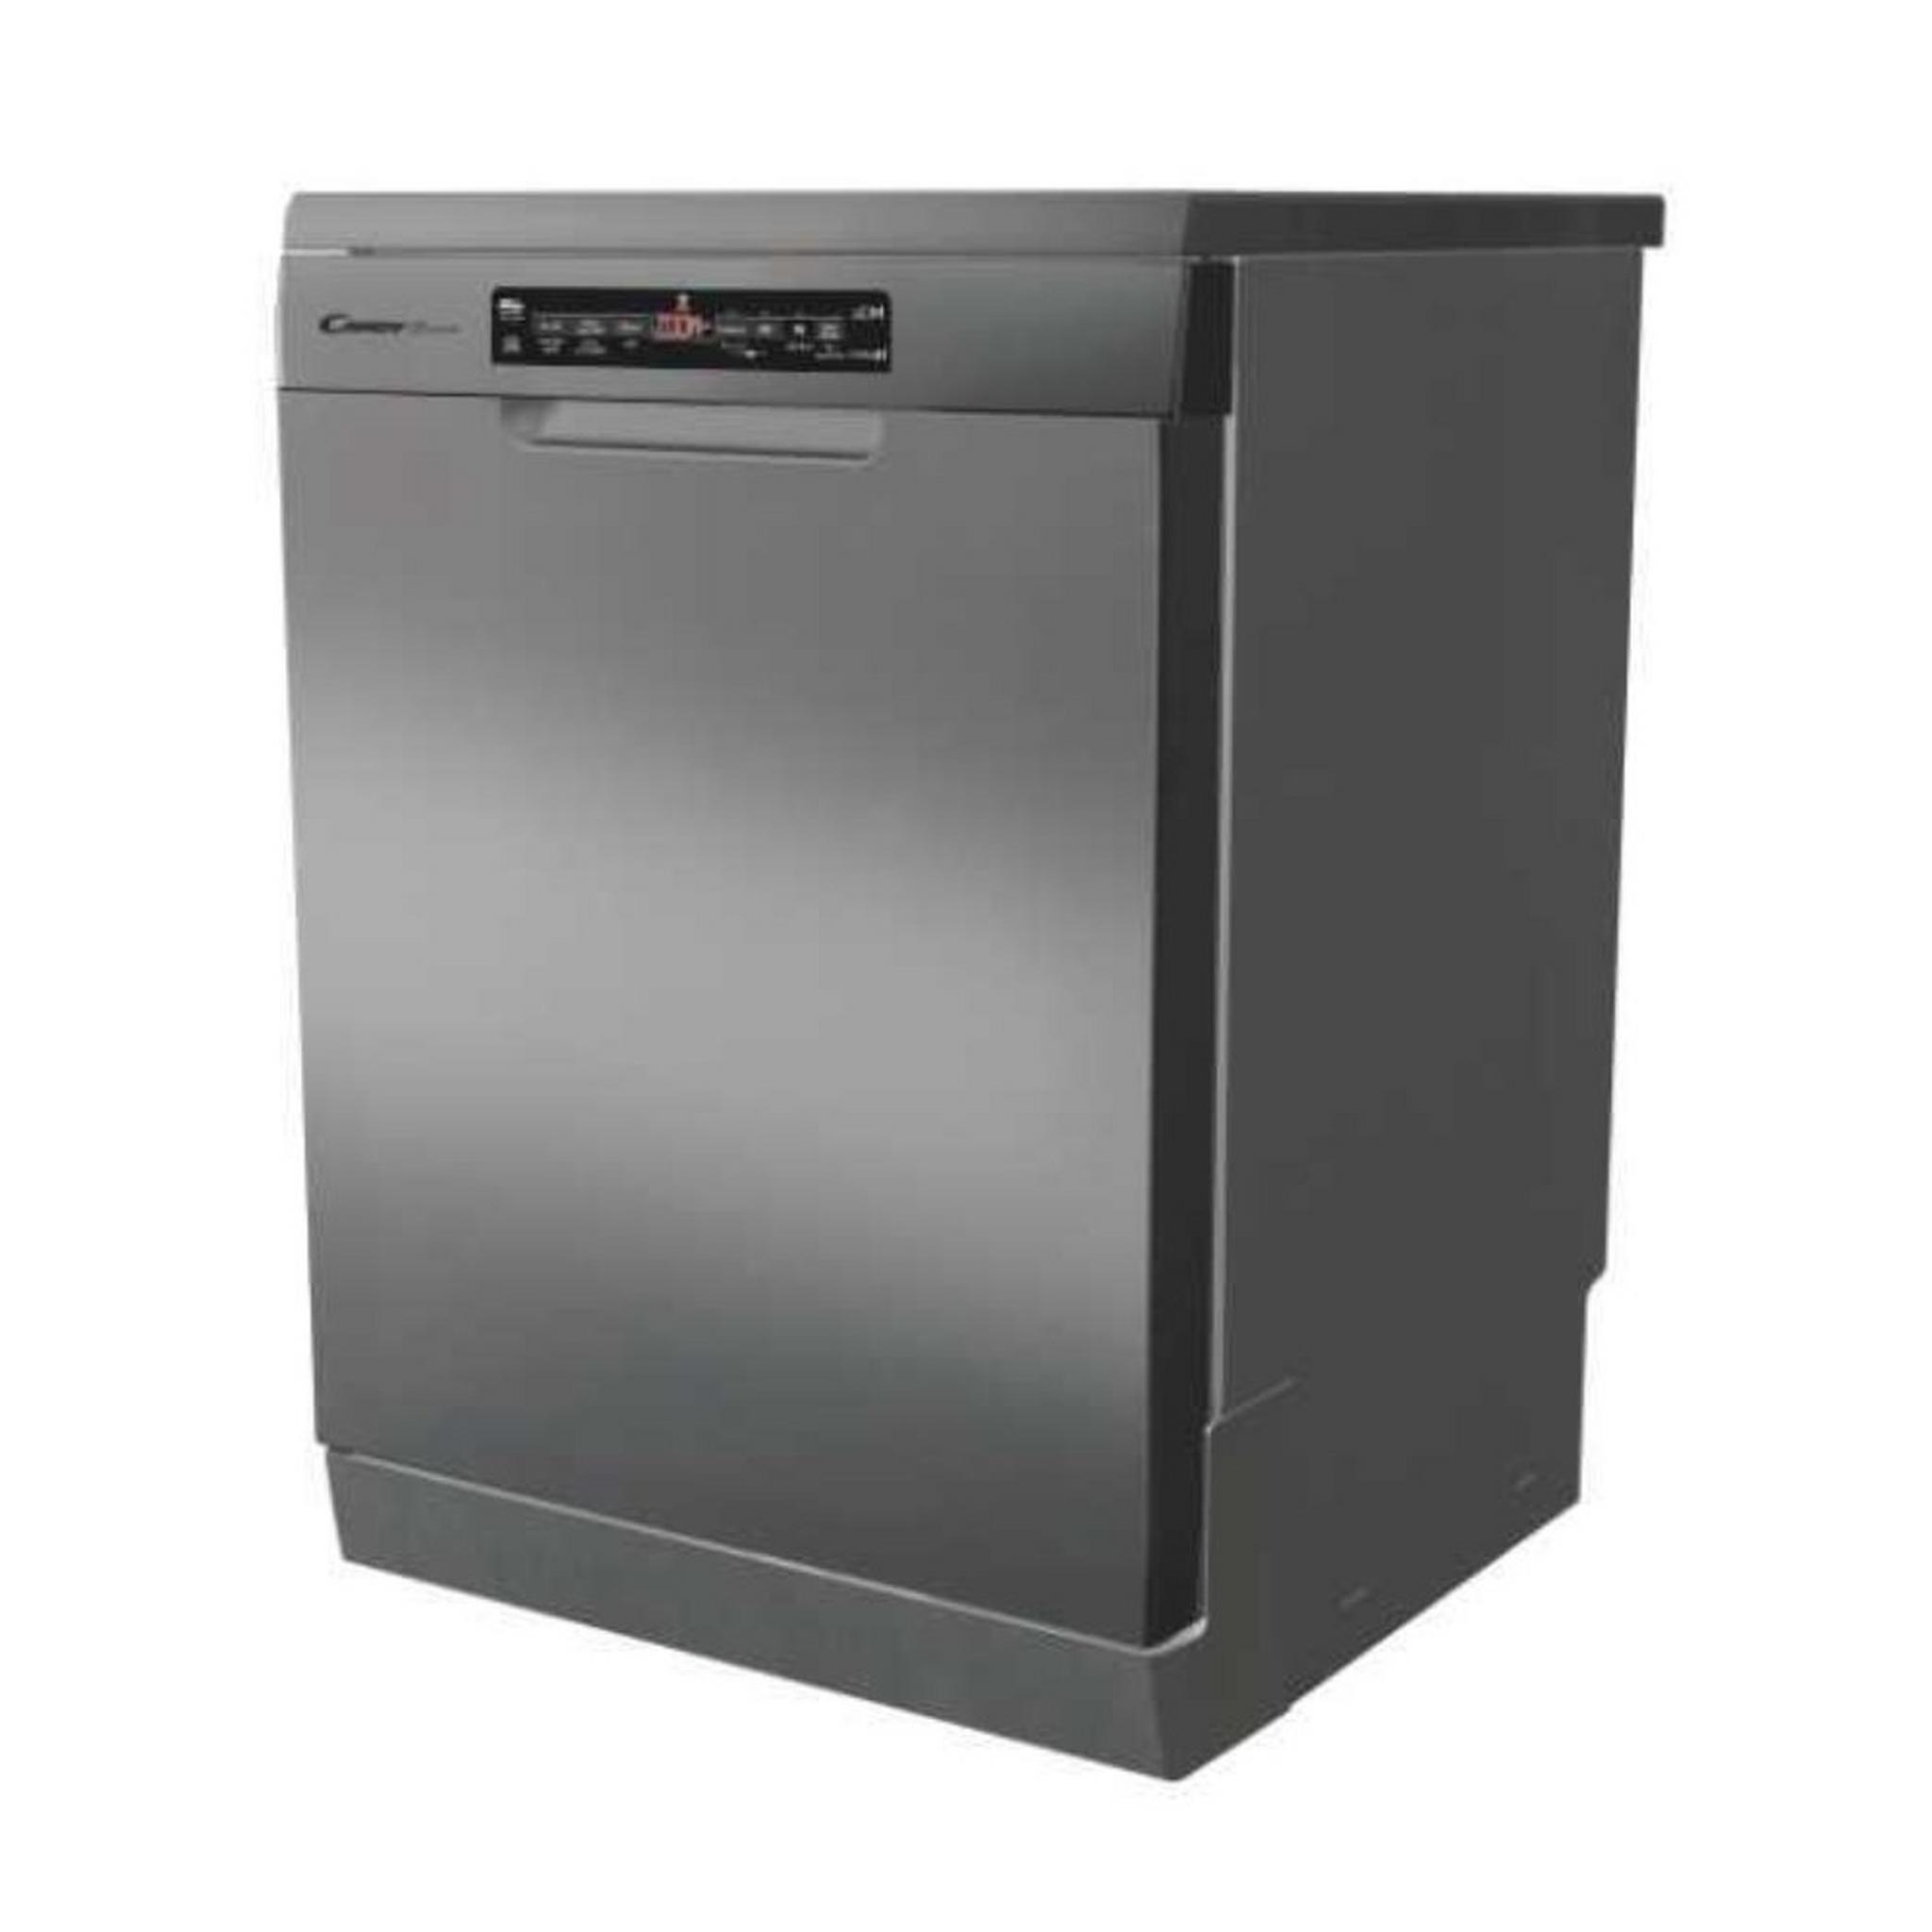 Candy 9 Programs Wifi Free Standing Dishwasher (CDPN 2D360PX) - Stainless Steel